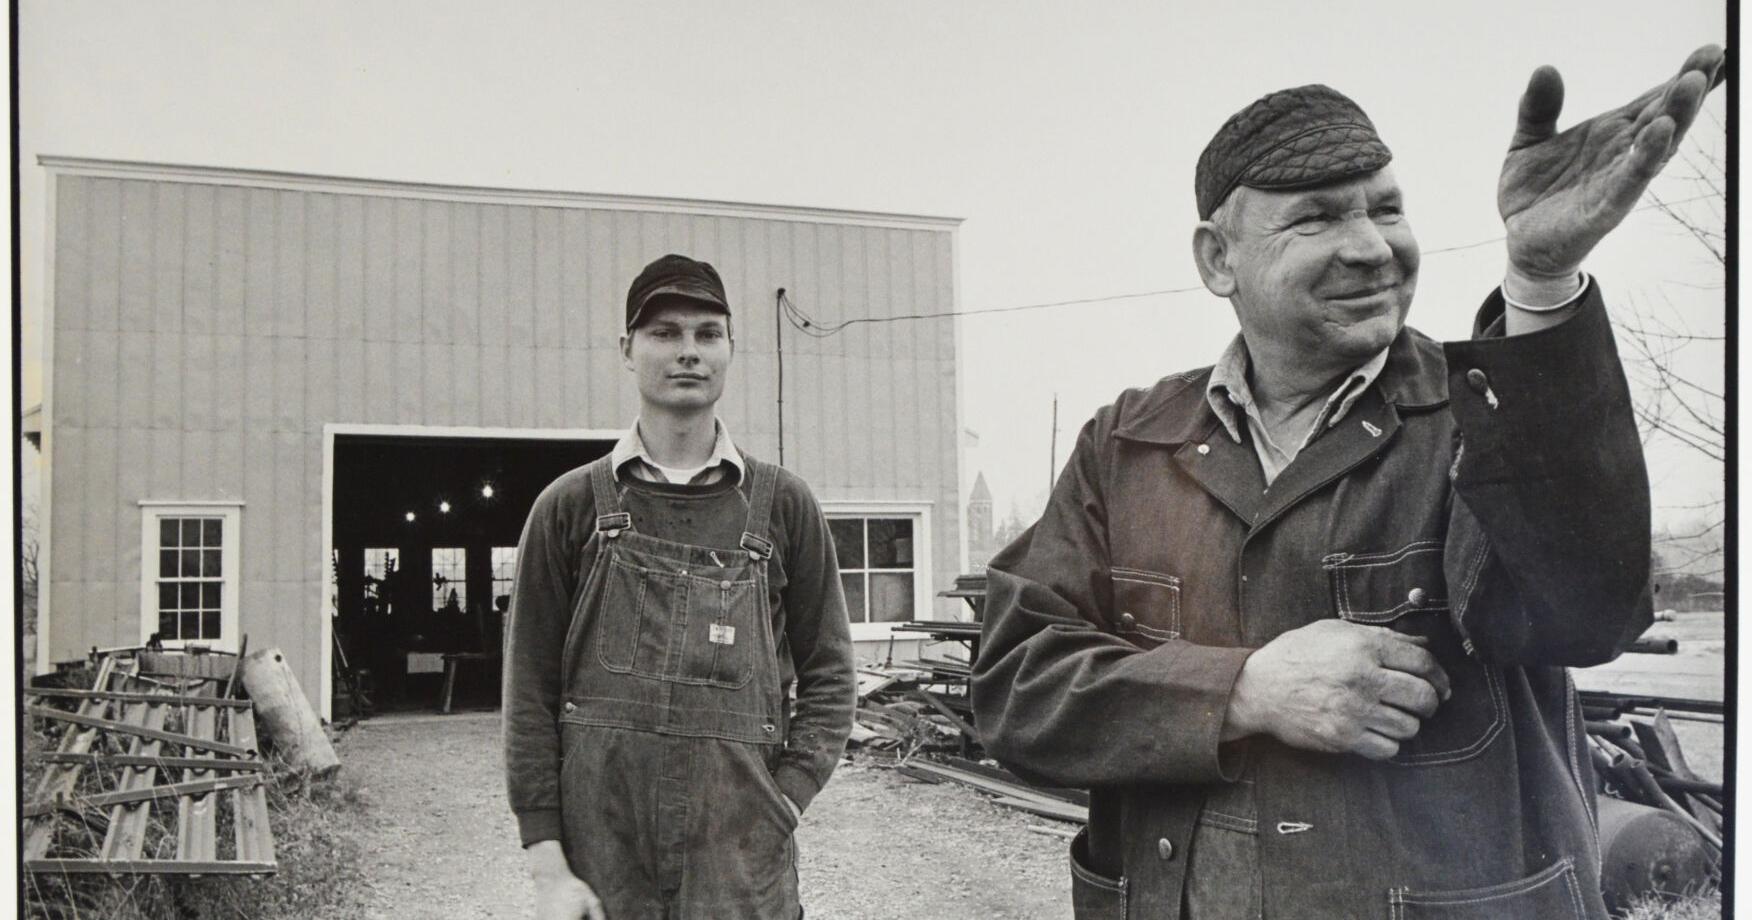 Lovettsville welder remembered for his trade, knowledge of local history